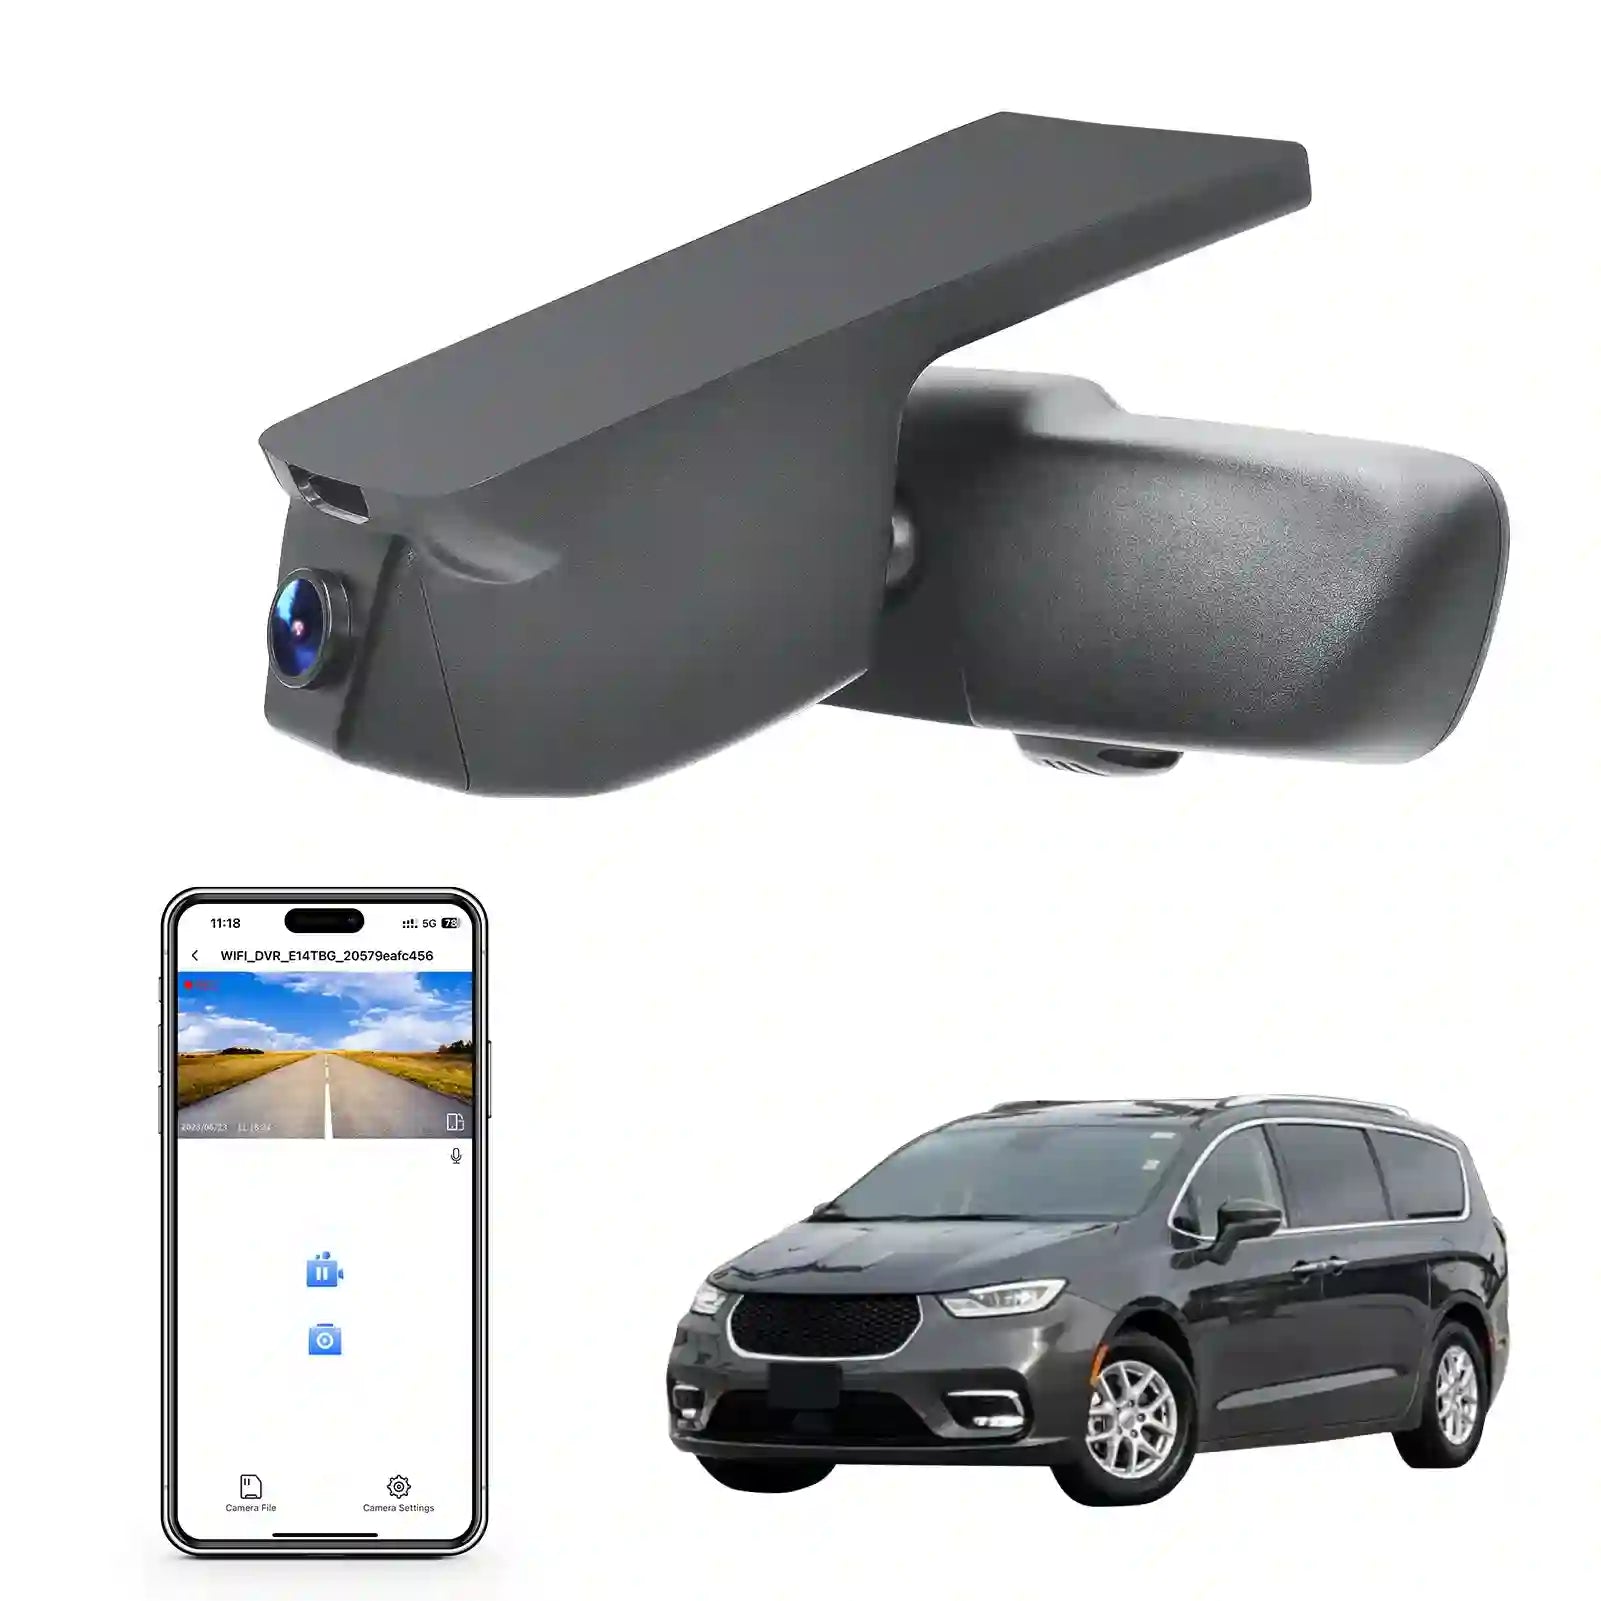 Mangoal 4K Dash Cam Custom Fit for Chrysler Pacifica 2017 2018 2019 2020 2021 2022(Model B),LX Limited Touring-L Touring Touring-L Plus,Integrated OEM Look, UHD 2160P Video, WiFi & App,128GB Card